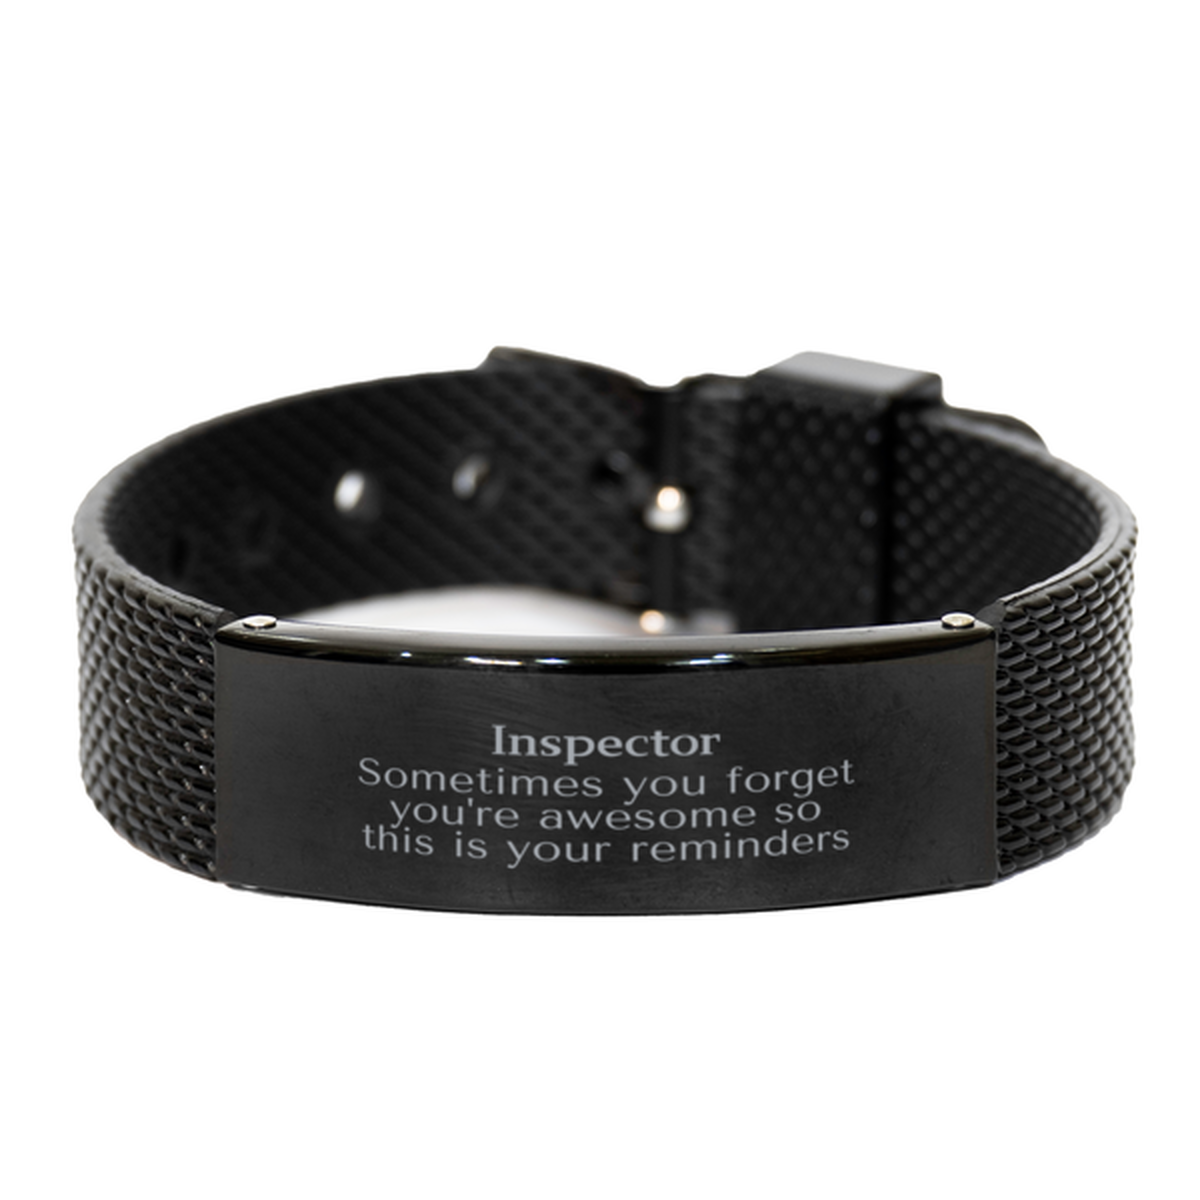 Sentimental Inspector Black Shark Mesh Bracelet, Inspector Sometimes you forget you're awesome so this is your reminders, Graduation Christmas Birthday Gifts for Inspector, Men, Women, Coworkers